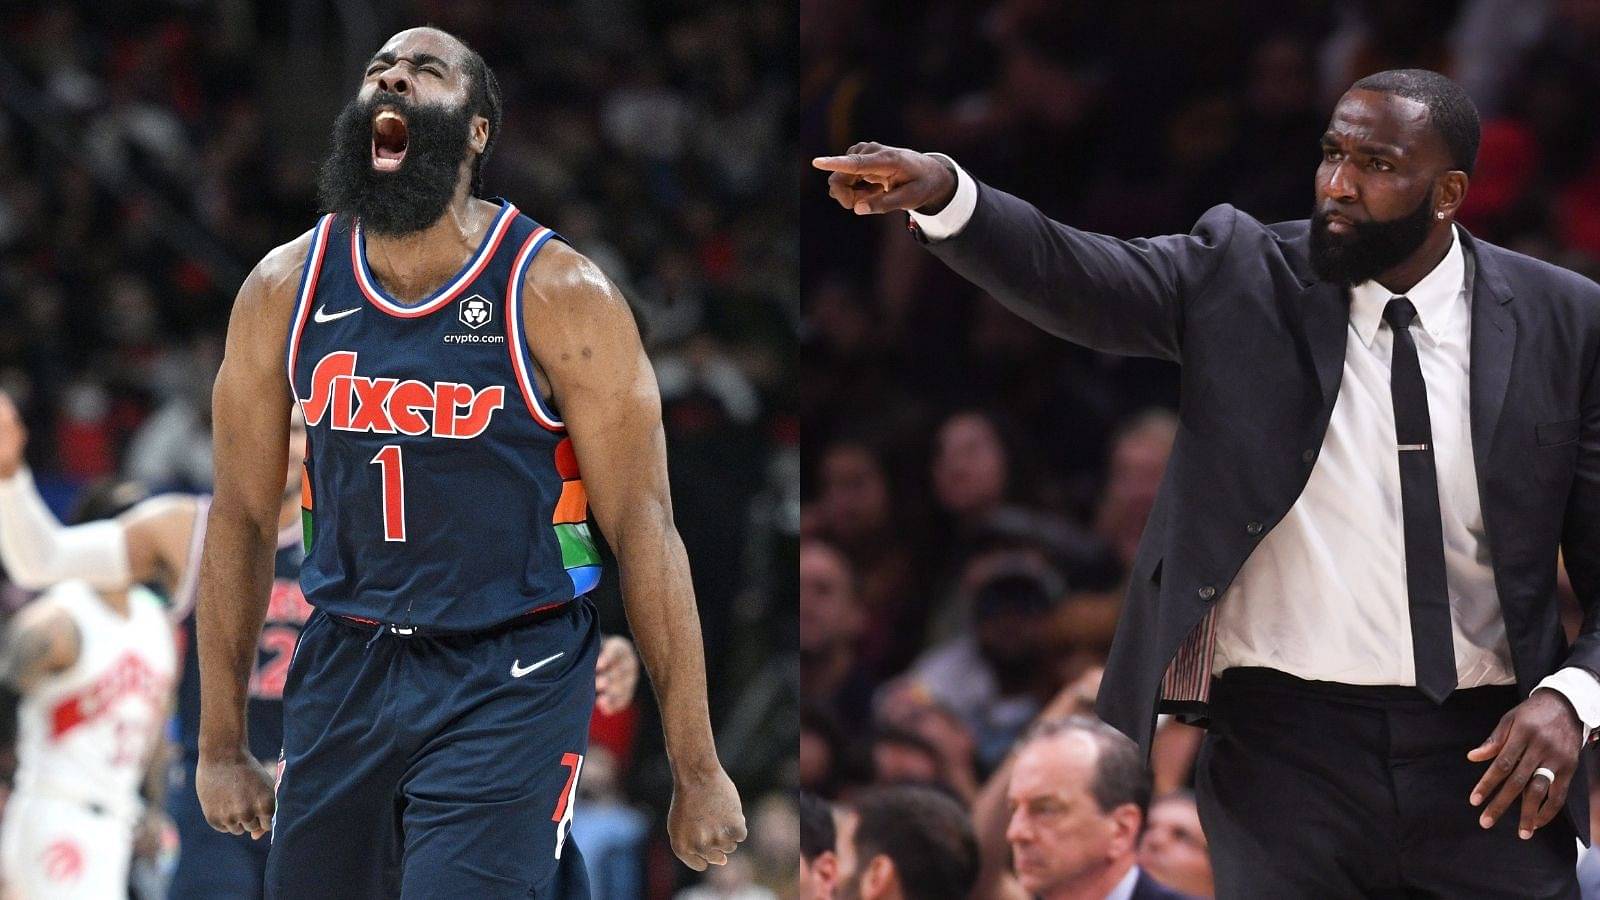 "James Harden with a 22 piece, 15 biscuits and 6 small fries sent Raptors to Cancun with Drake": Kendrick Perkins can't get over food and vacation as Philadelphia 76ers move to conference semi-finals